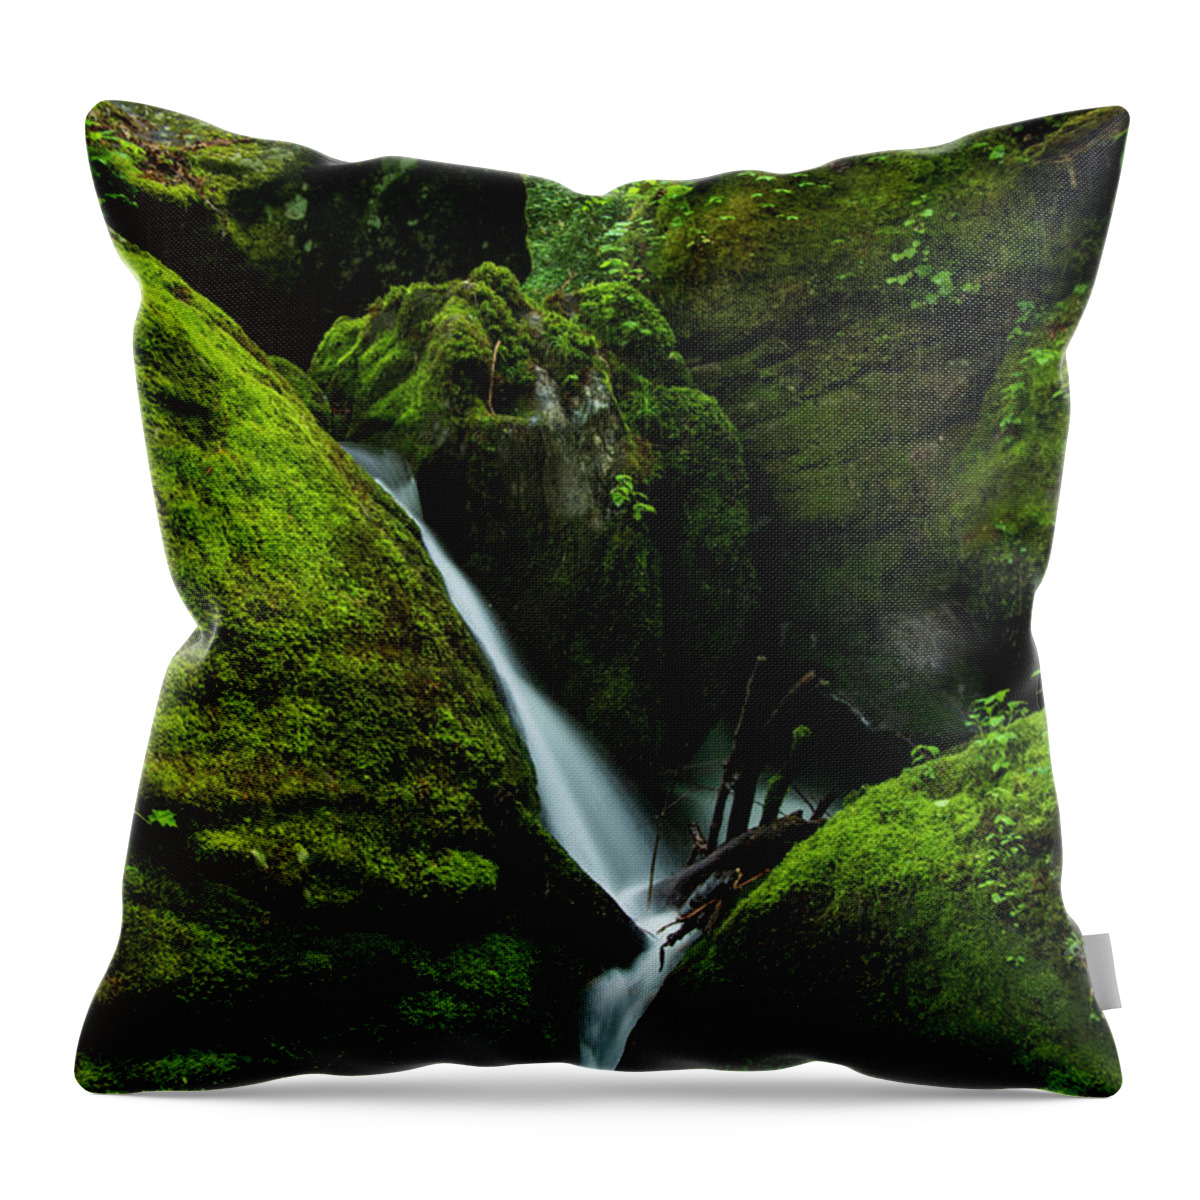 Great Smoky Mountains National Park Throw Pillow featuring the photograph Below 1000 Drips 1 by Melissa Southern